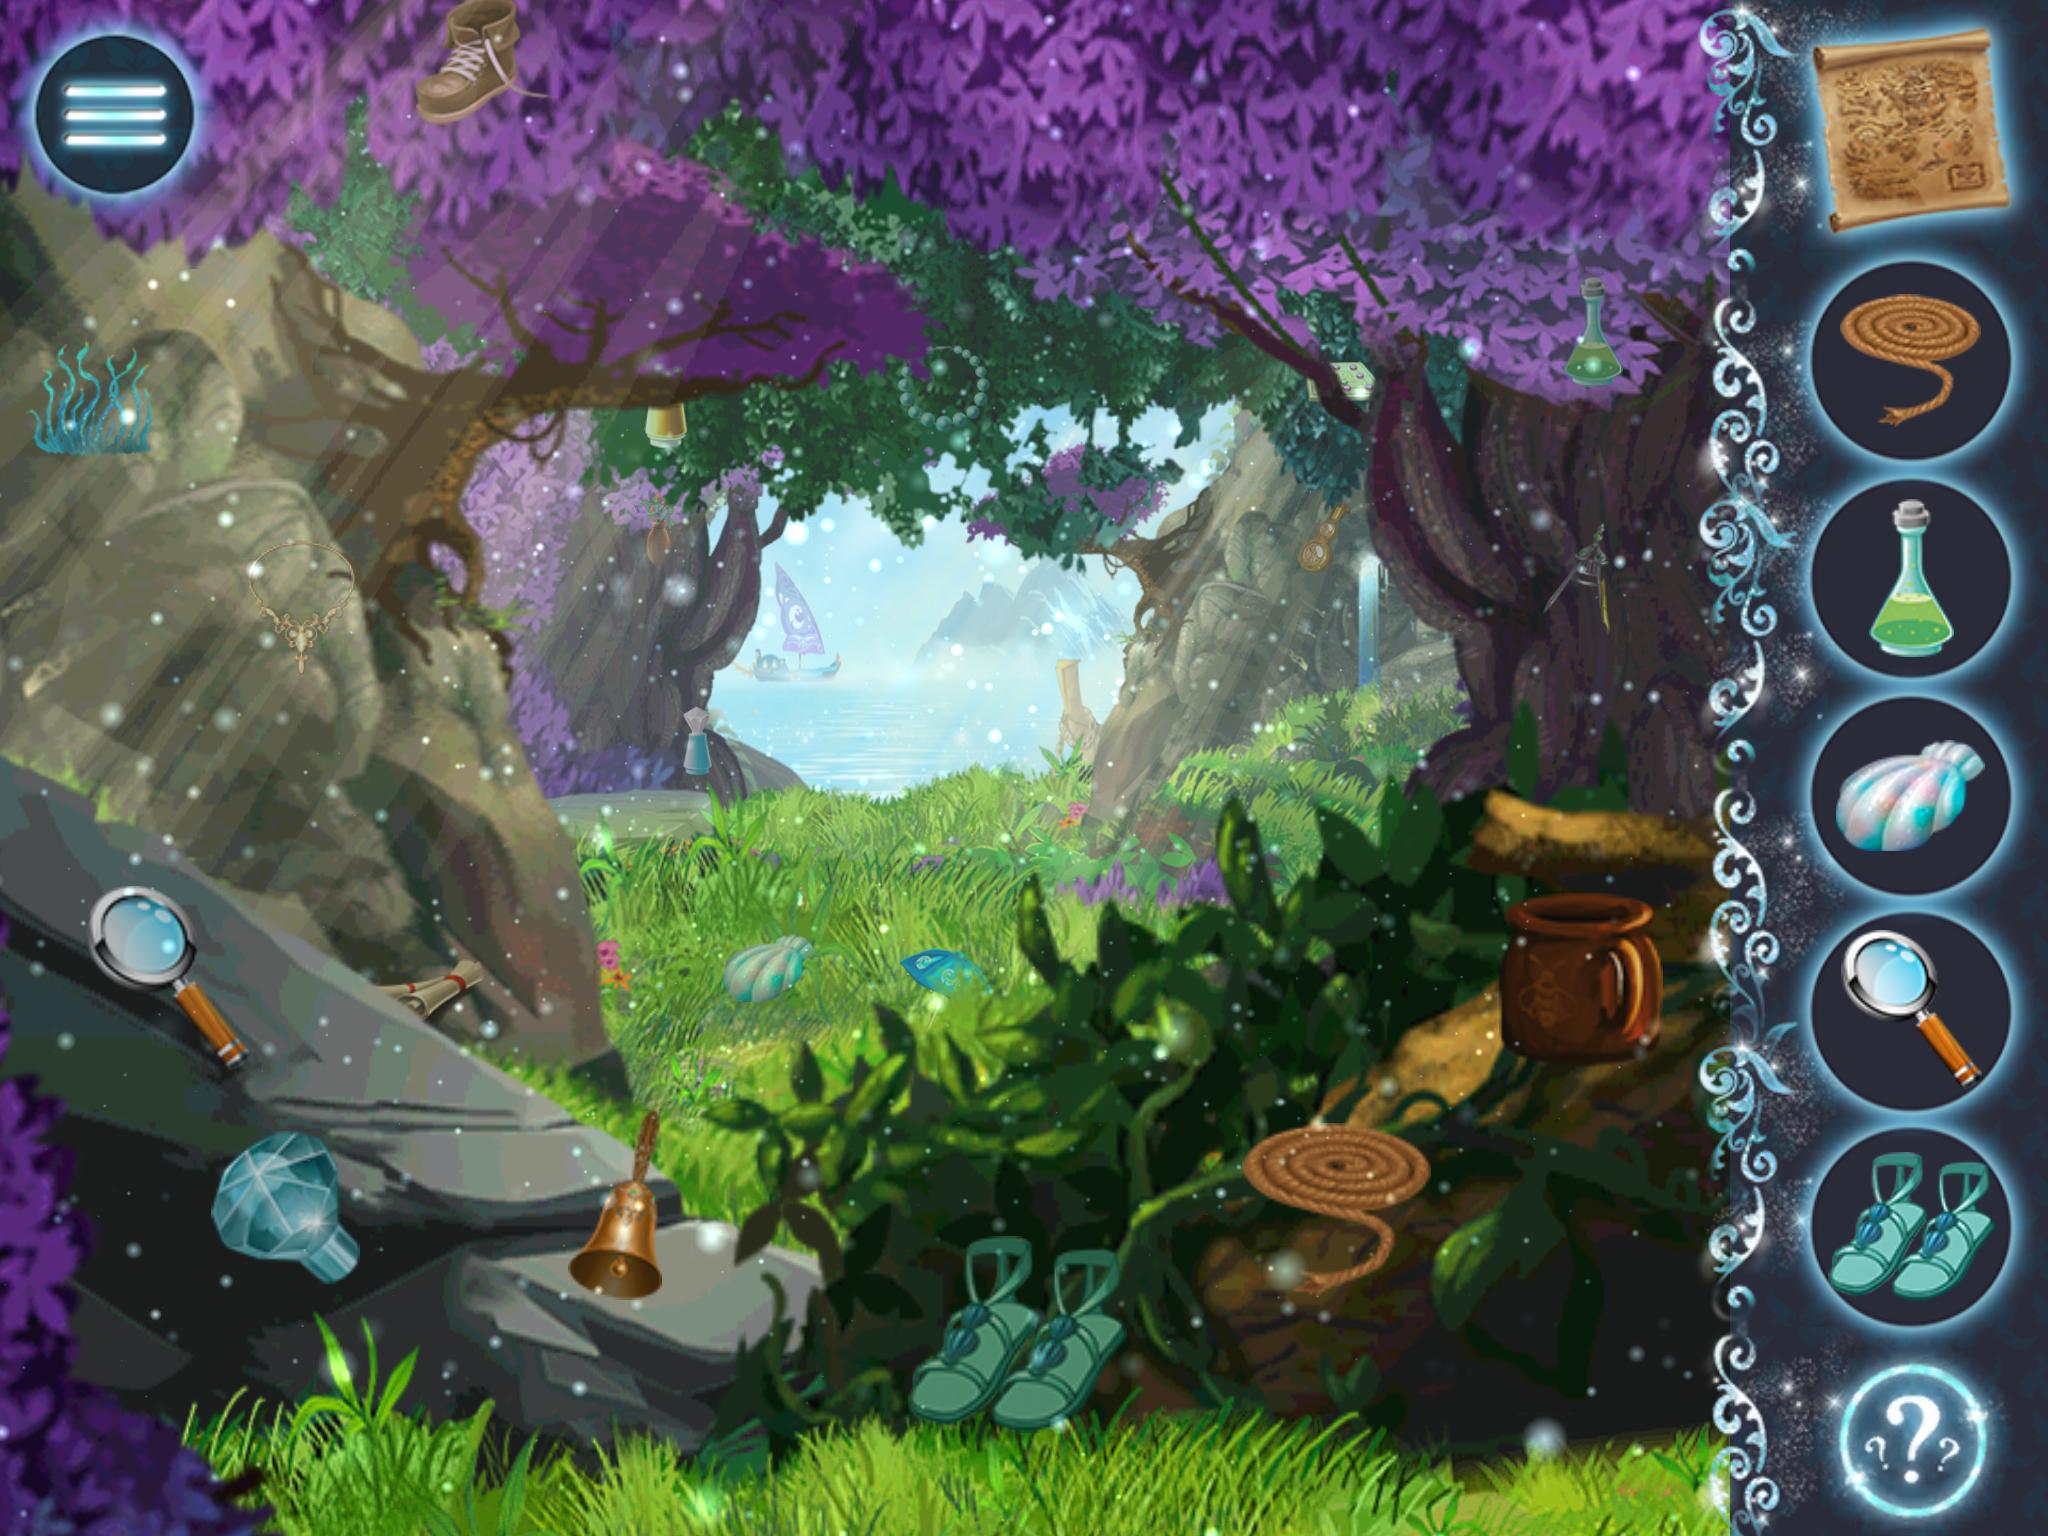 LEGO® Elves - Unite The Magic for Android - APK Download